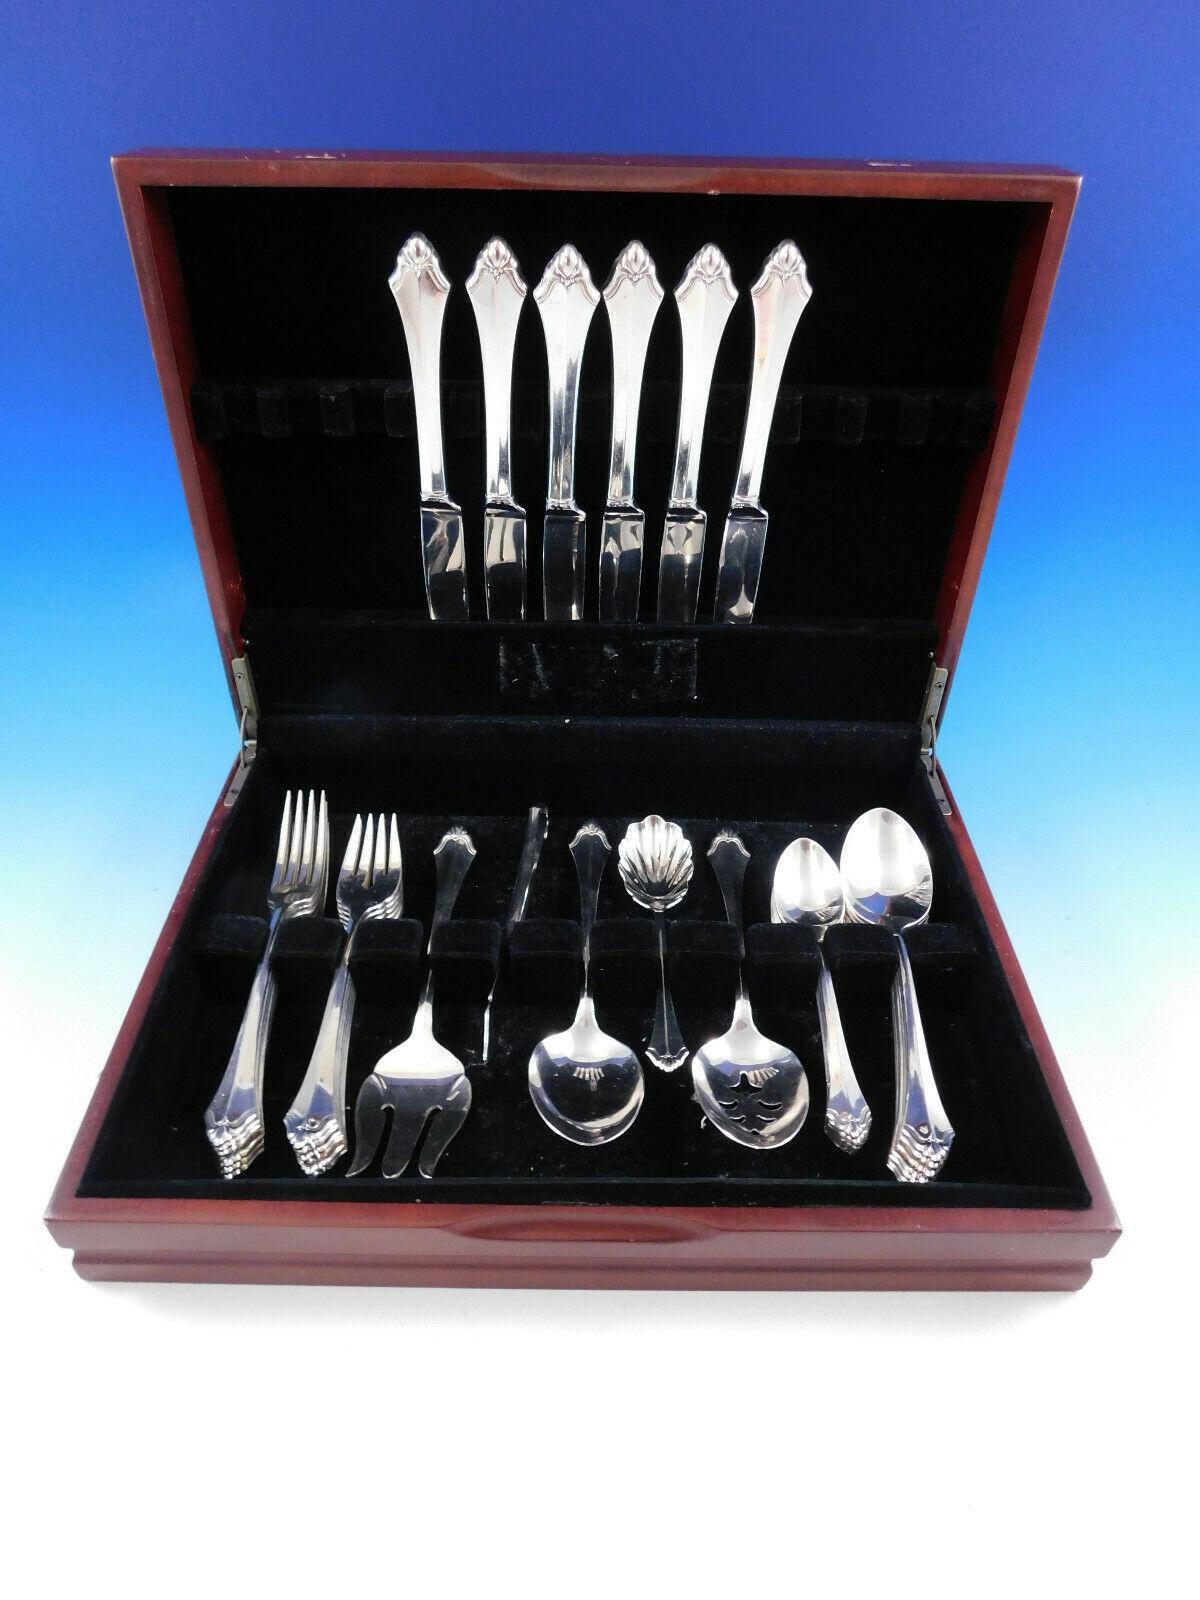 Belcourt by Community / oneida silverplate flatware set - 35 pieces. This set includes:

6 Dinner Knives, 9 3/4